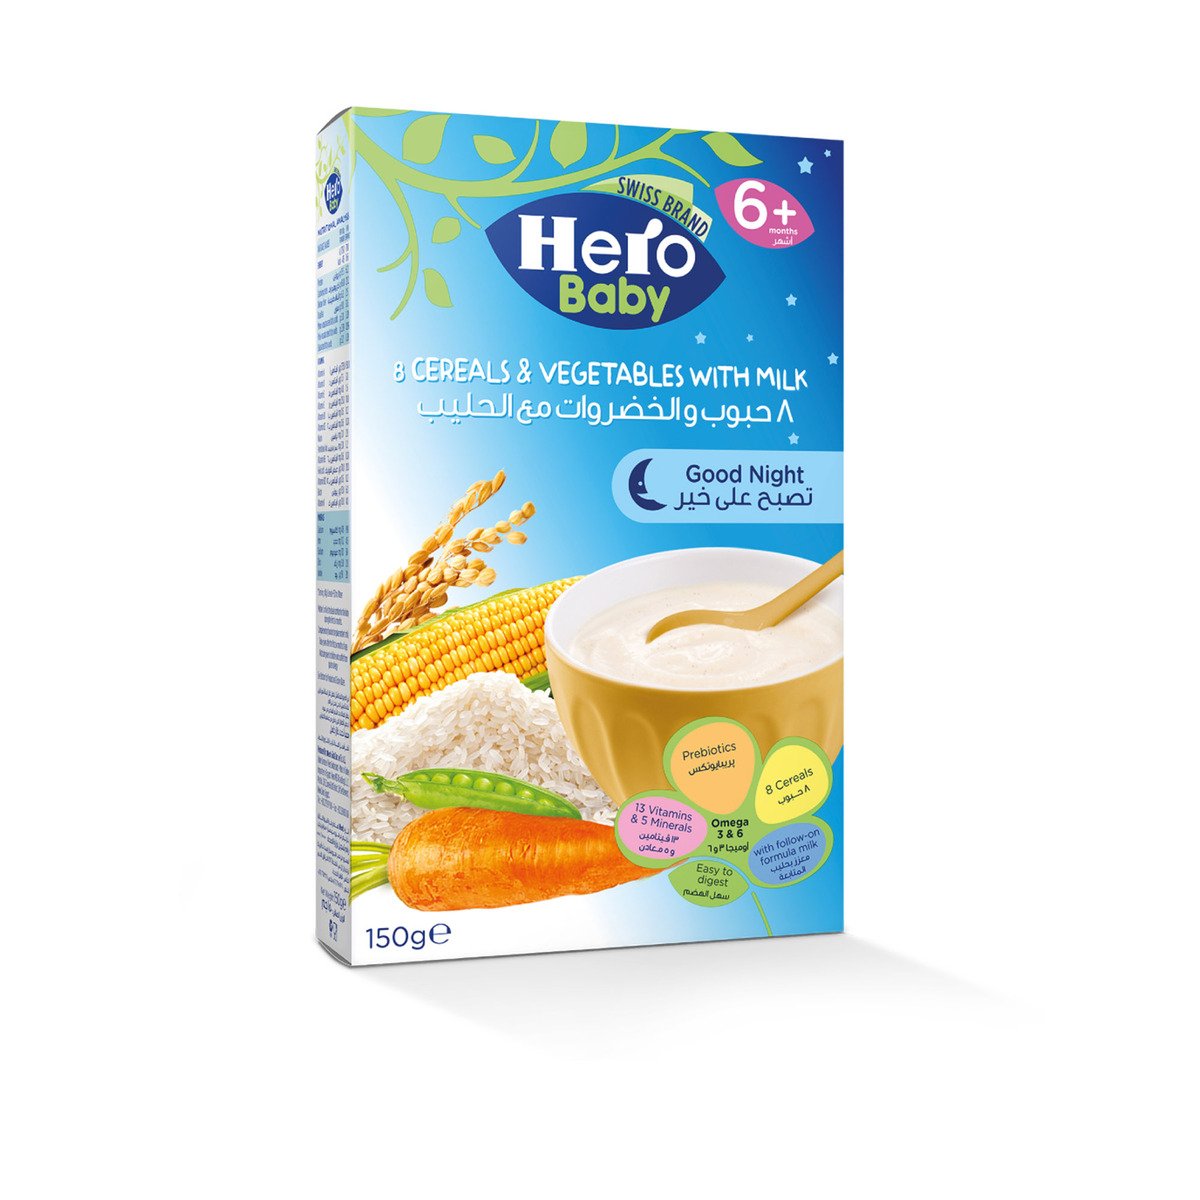 Hero Baby 8 Cereals & Vegetables With Milk From 6 Months 150 g